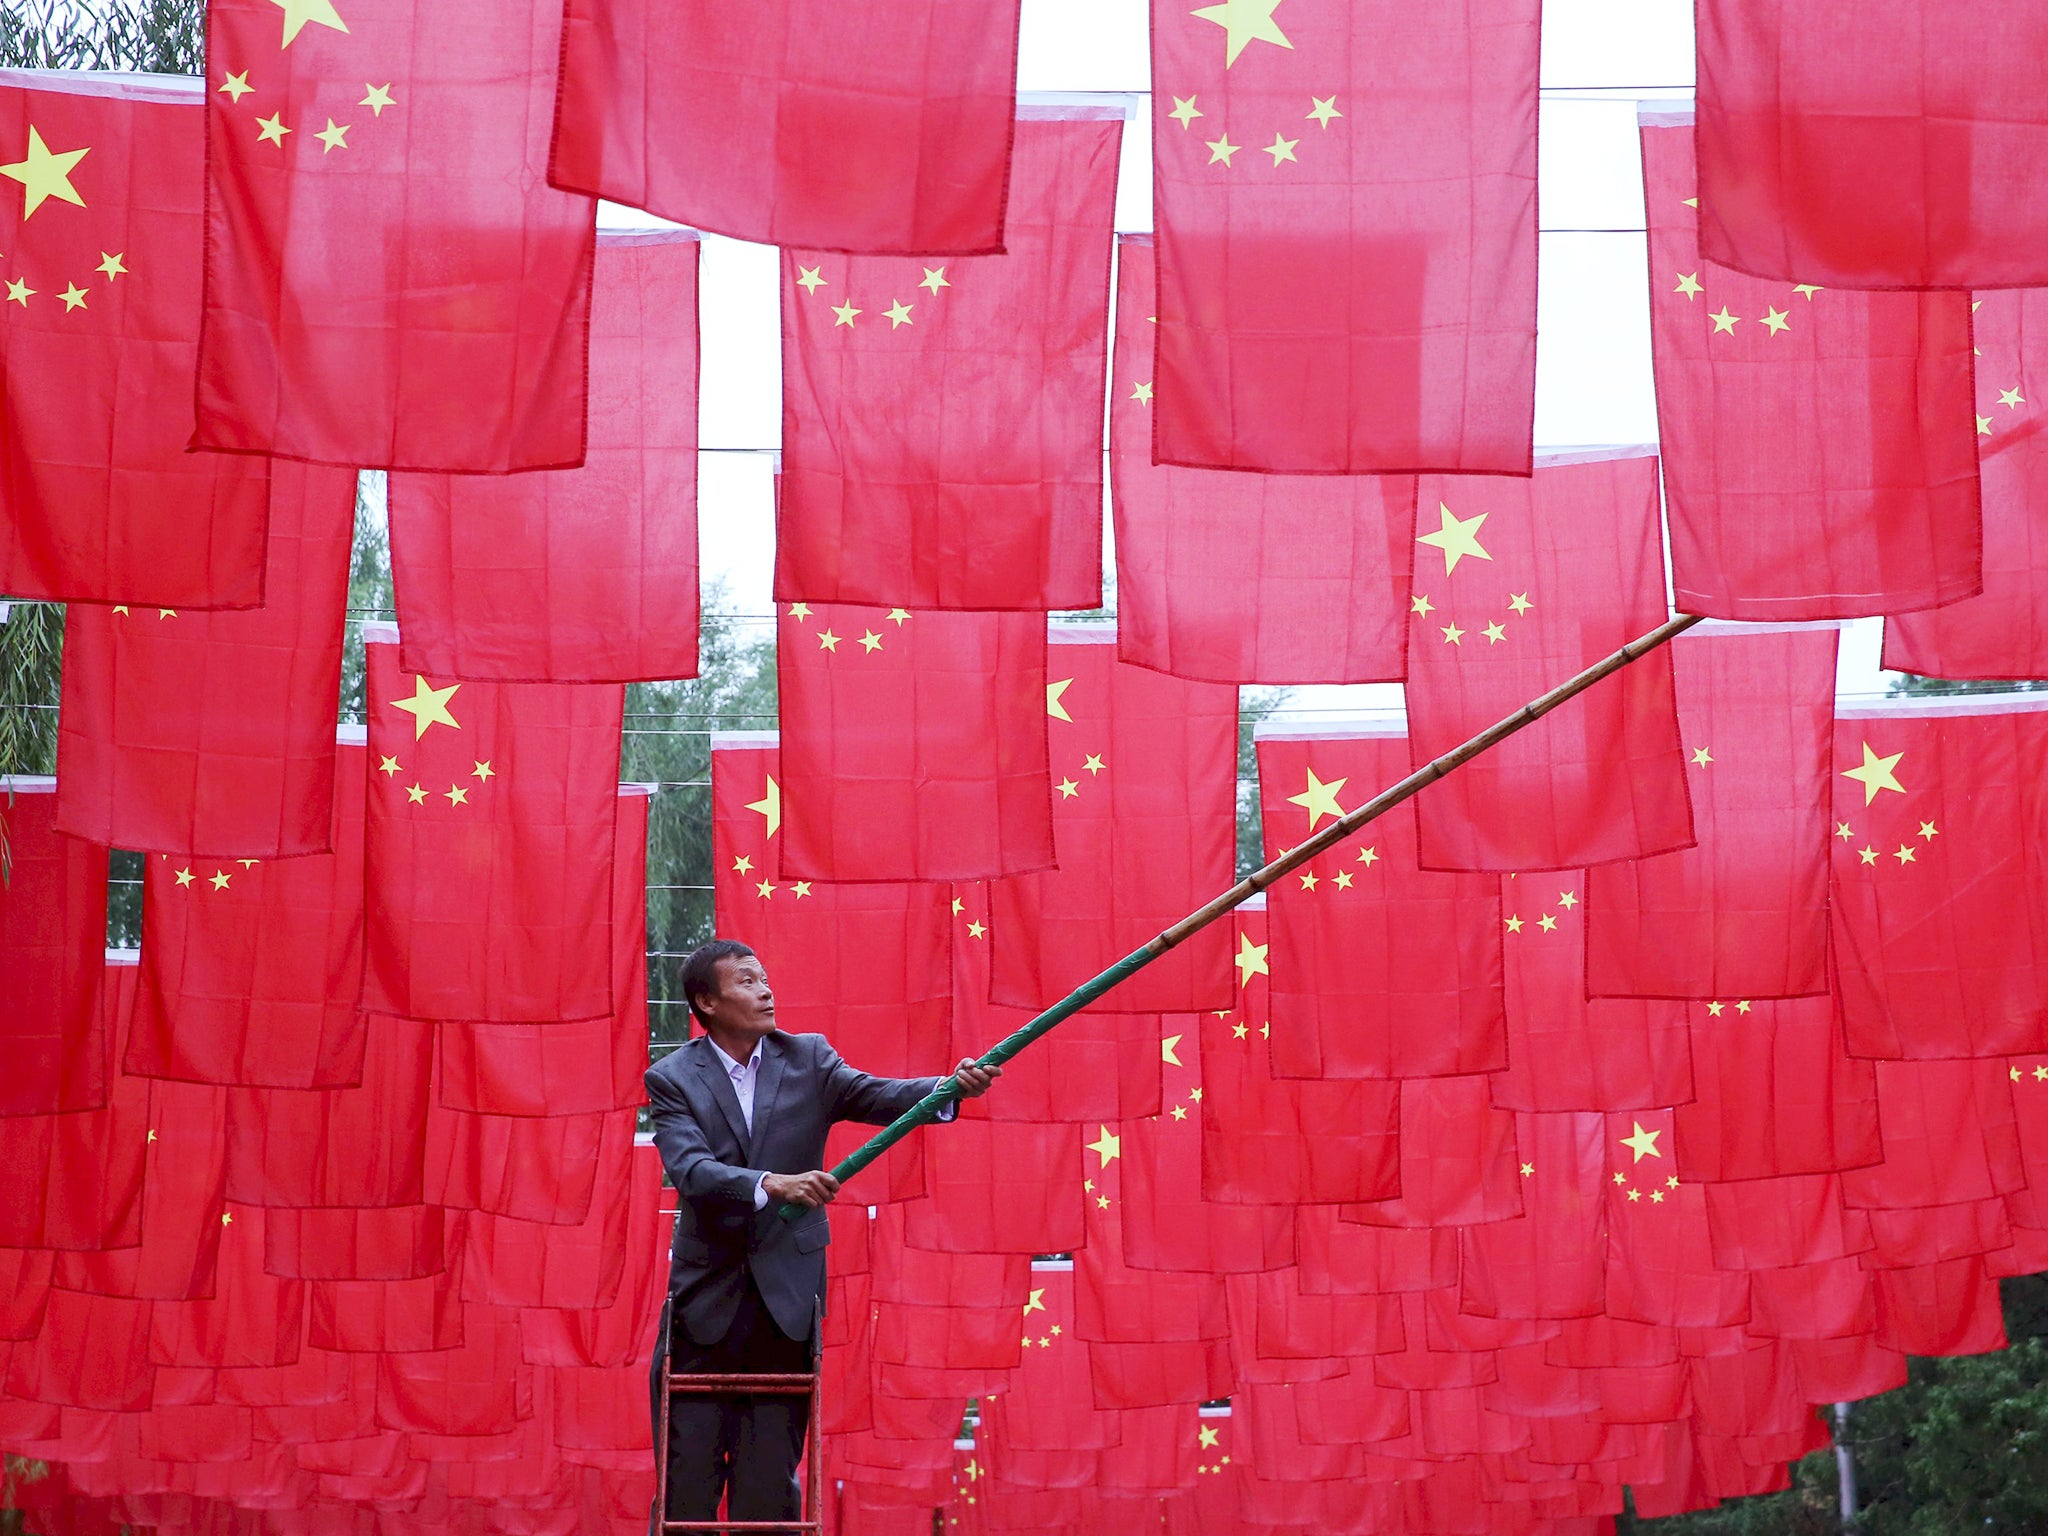 A man hangs Chinese national flags as decorations at a park, ahead of China's National Day, in Beijing